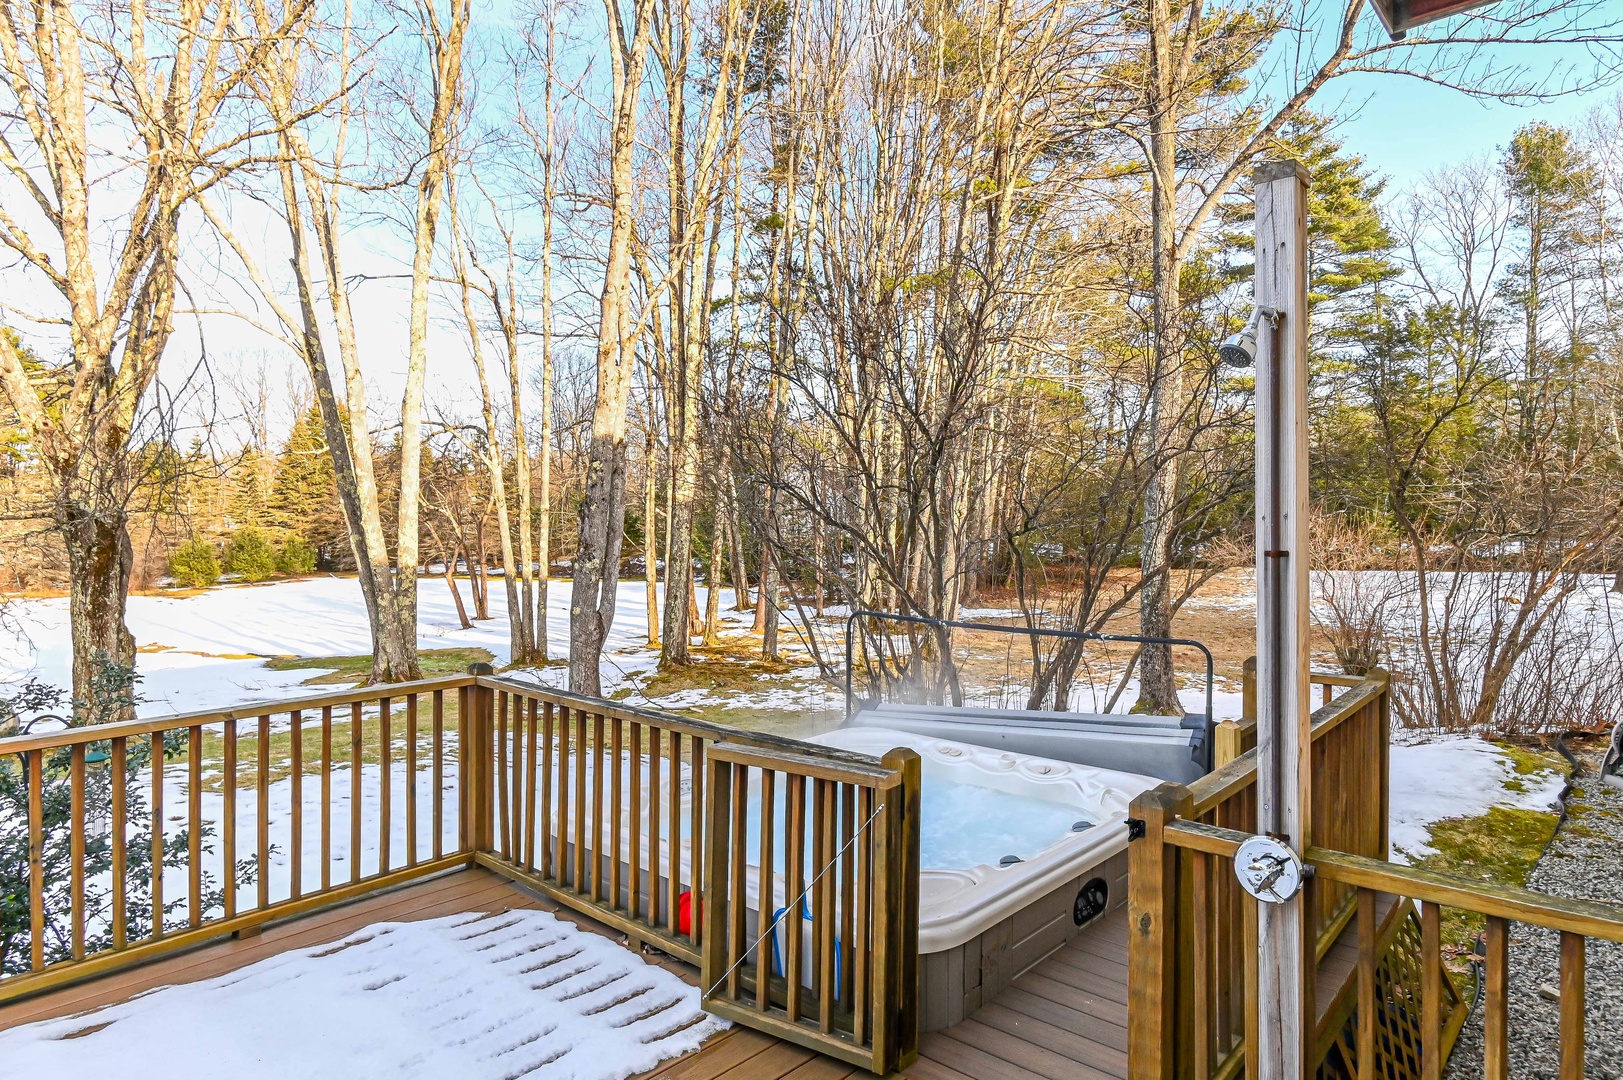 Soak the day away in the hot tub or rinse off the summer sand at the outdoor shower